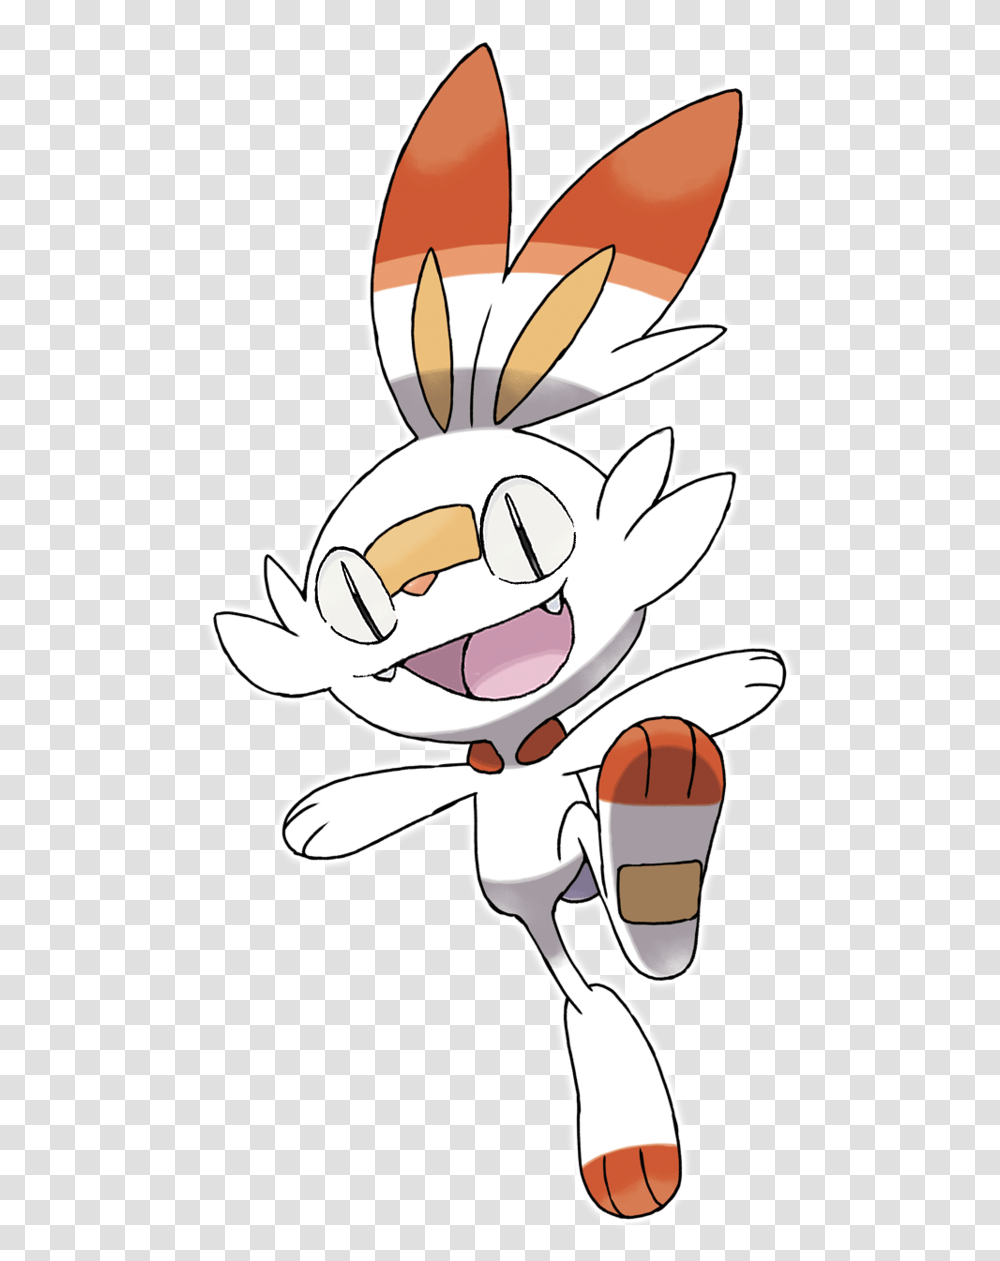 Ngl He Looks Like Meowth So Heres A Pokemon Scorbunny Coloring, Plant, Seed, Grain, Produce Transparent Png